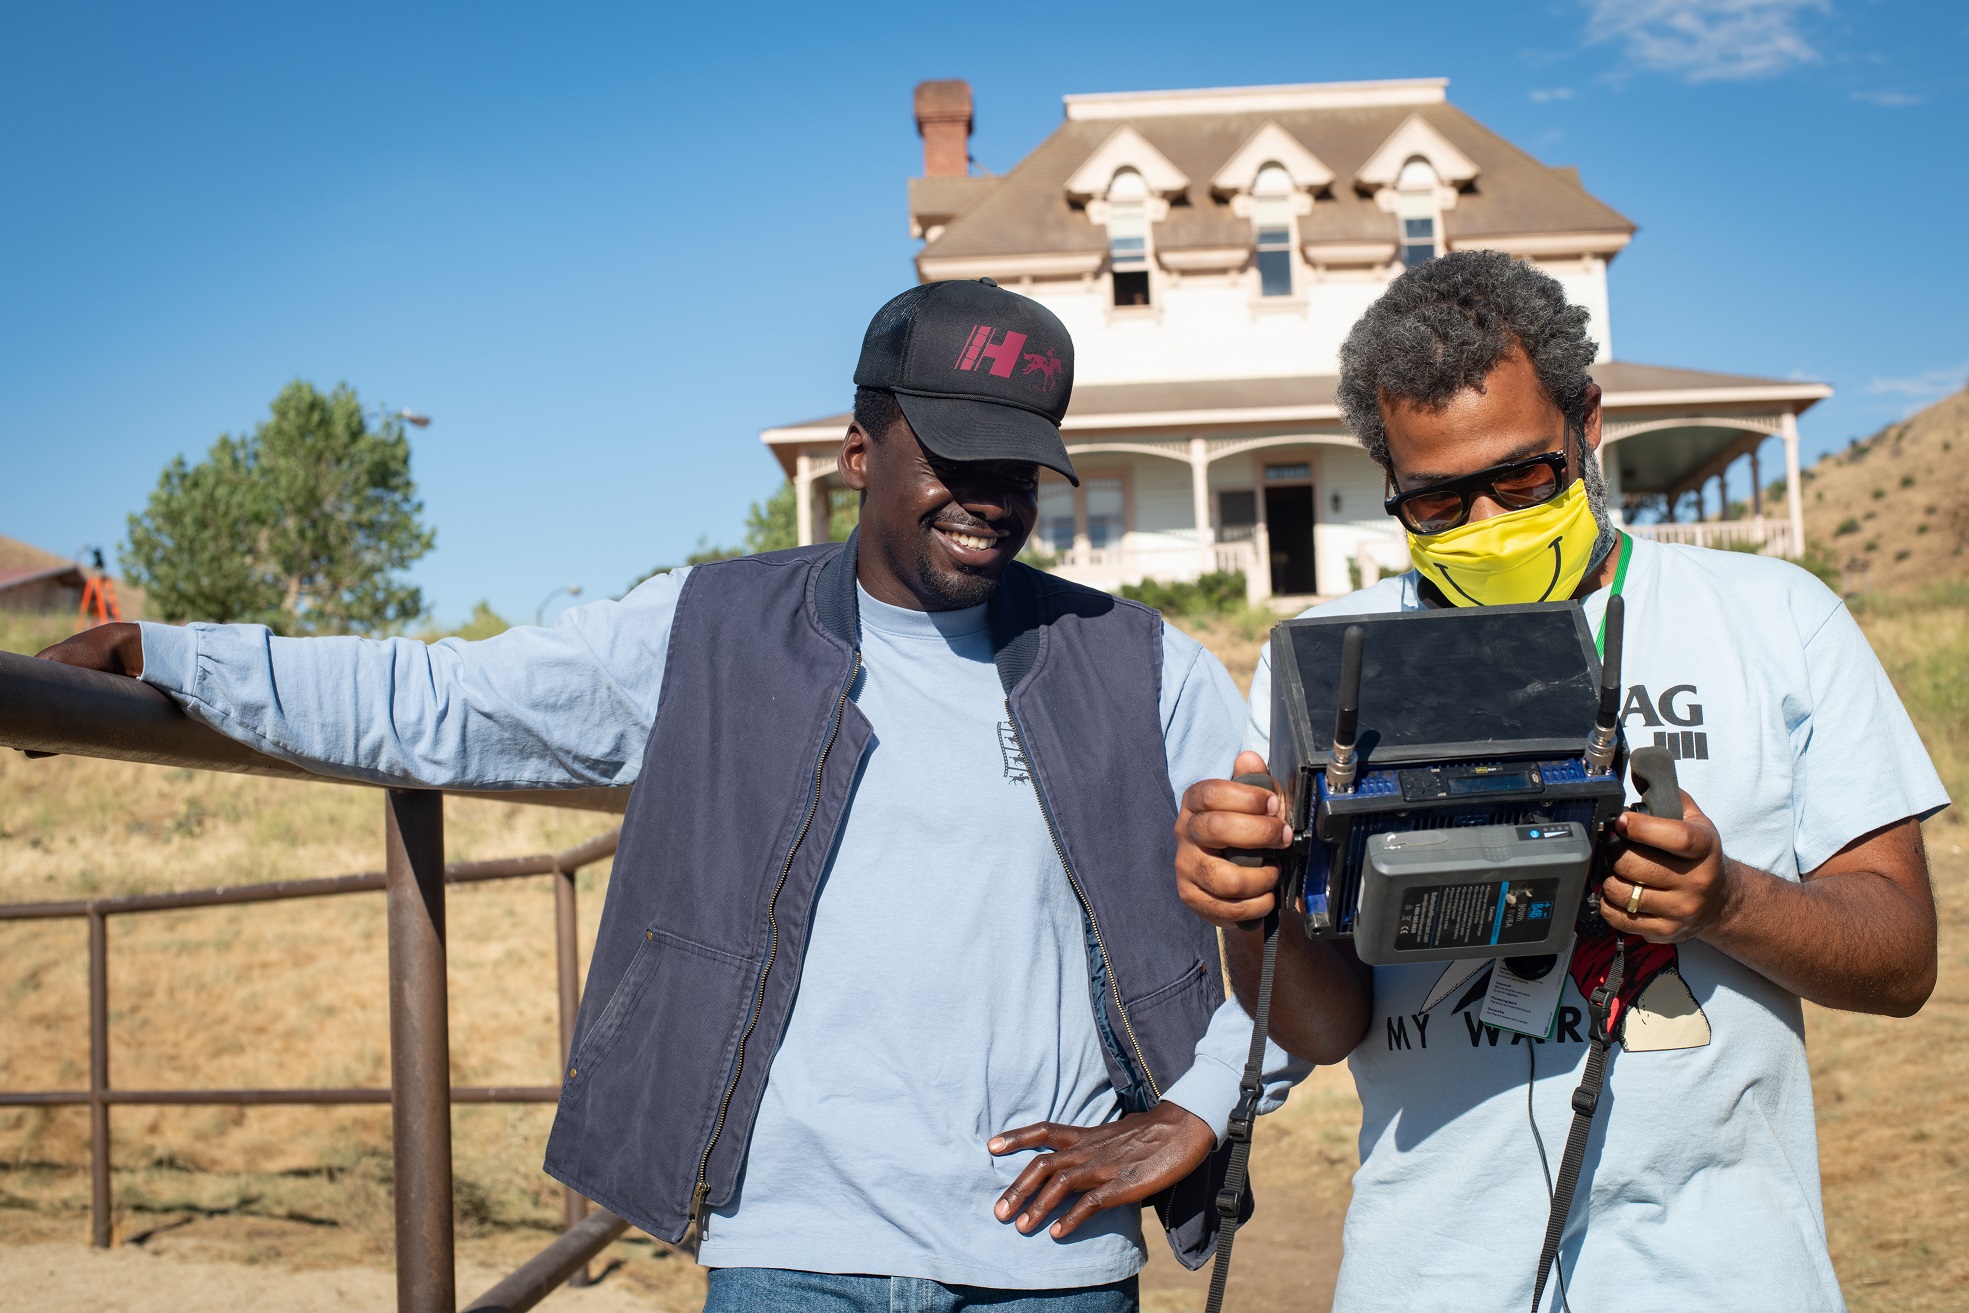 Left to right: Daniel Kaluuya and Writer/Director/Producer Jordan Peele on the set of 'Nope'. Image: courtesy of Universal Pictures Nope